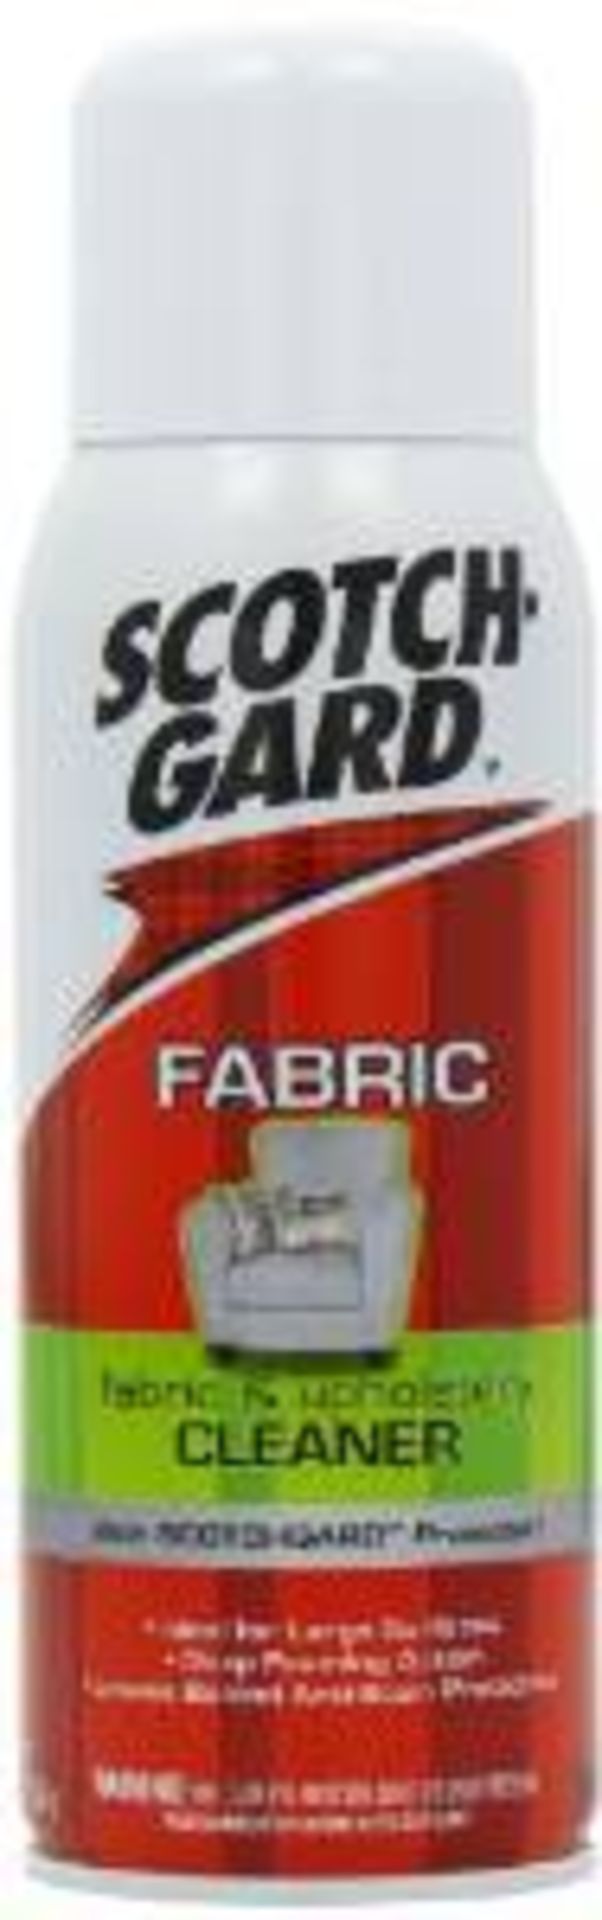 1 Box of 15 units Box 'ff235' - Latest AMZ price £67.49 - Scotchgard Fabric and Upholstery Cleaner - Image 2 of 3